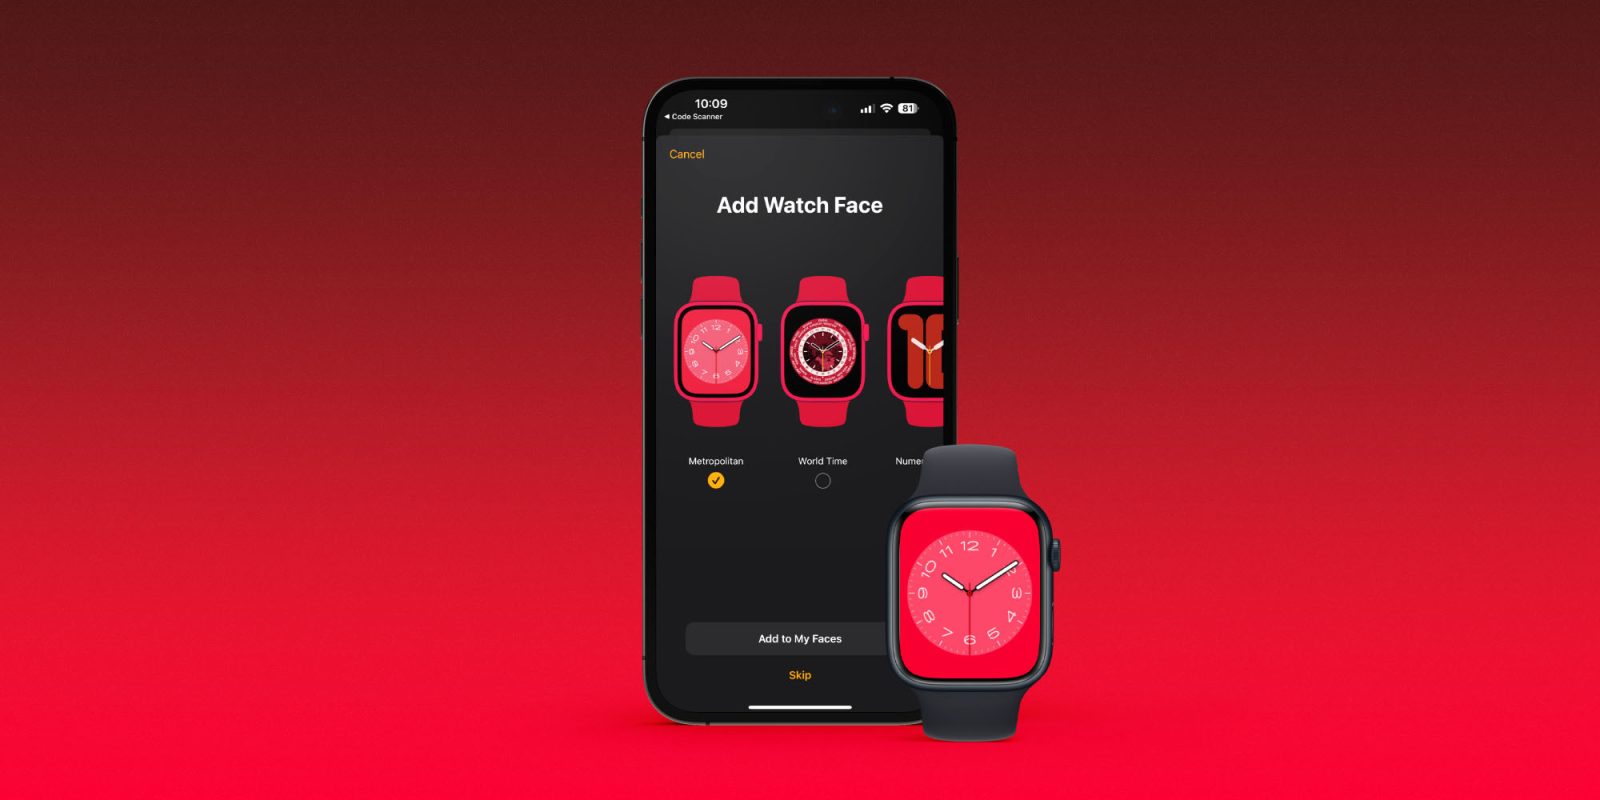 Apple promoting all (RED) version of the Metropolitan Apple Watch face ahead of World AIDS Day